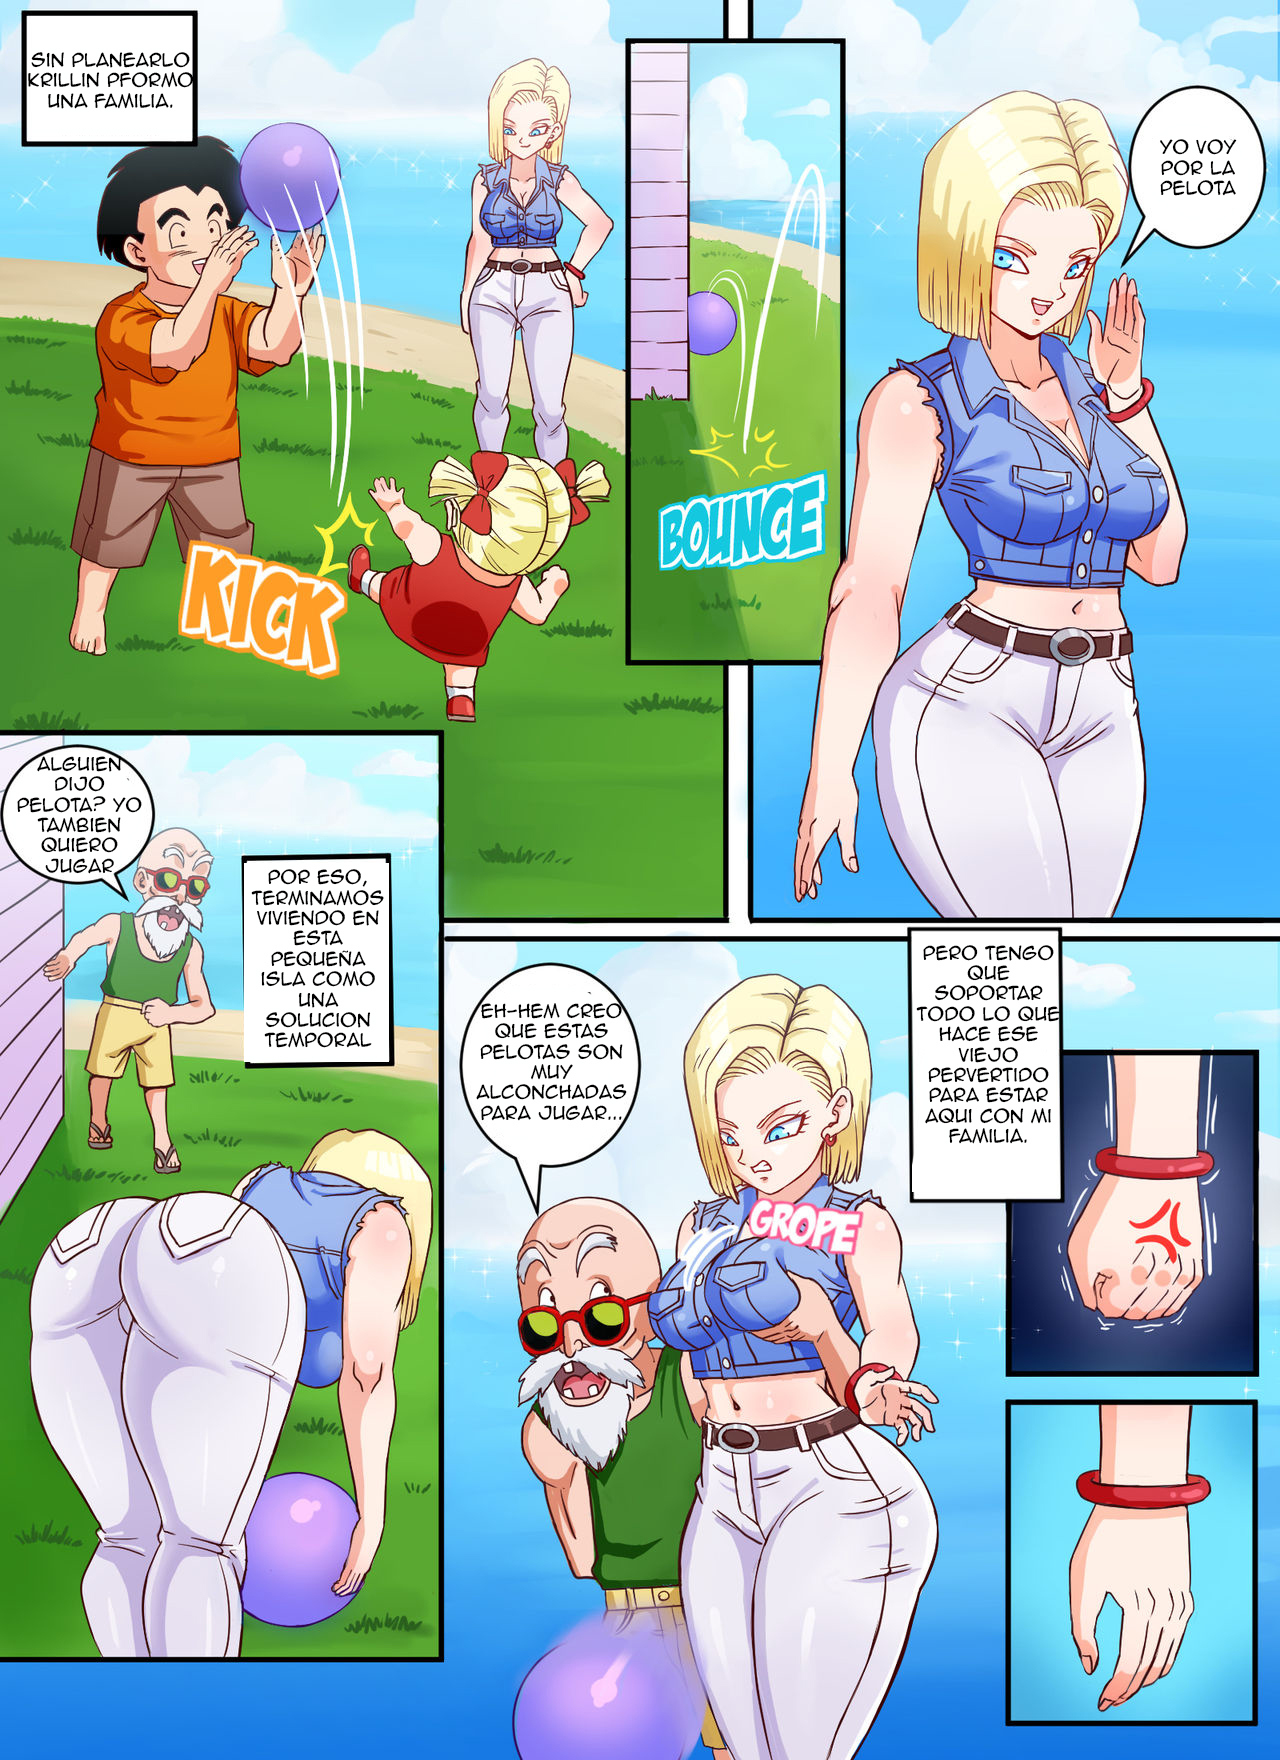 Android 18 x Roshi - Pink Pawg - ChoChoX.com